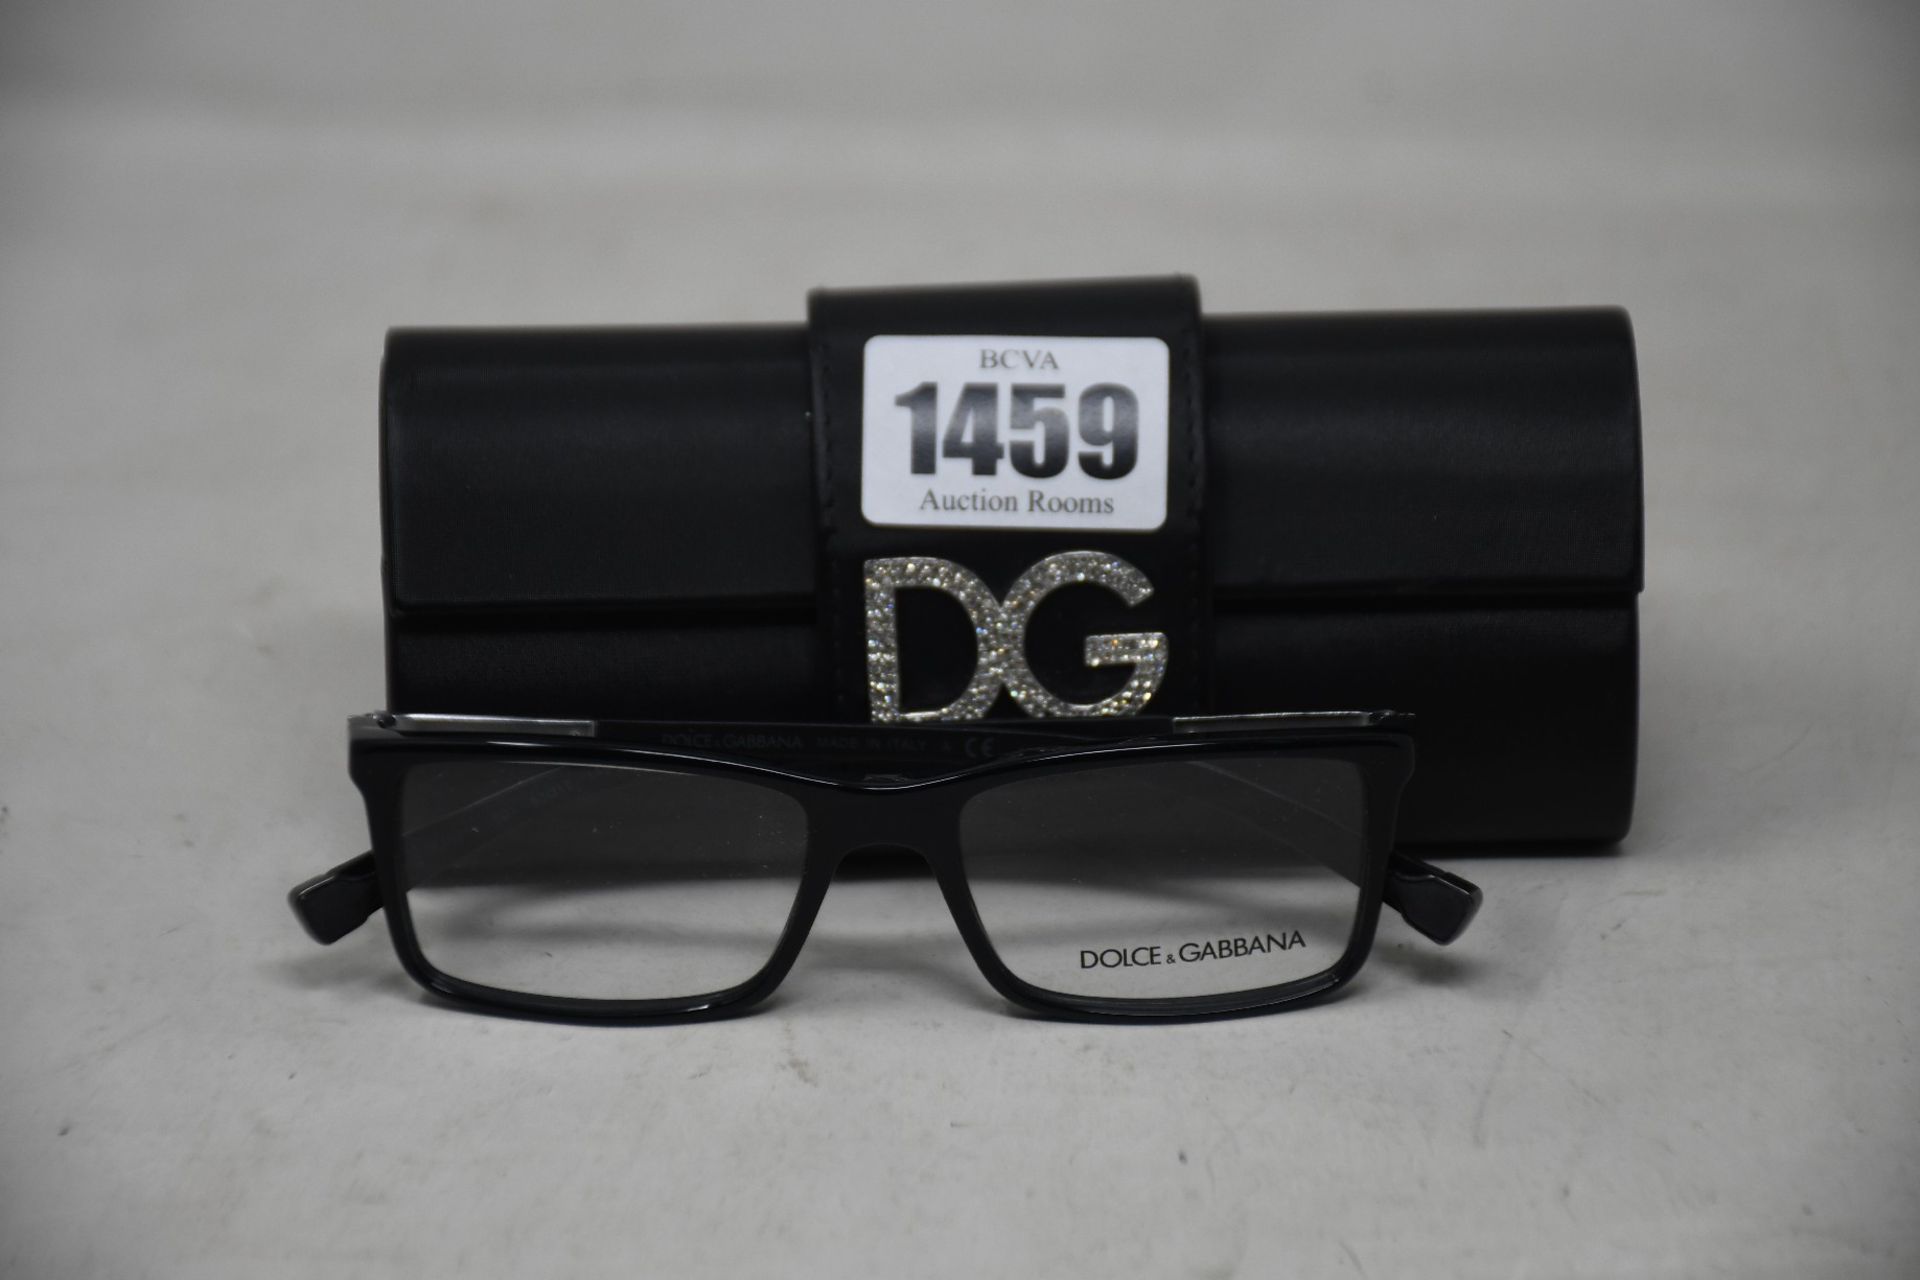 A pair of as new Dolce & Gabbana glasses frames.